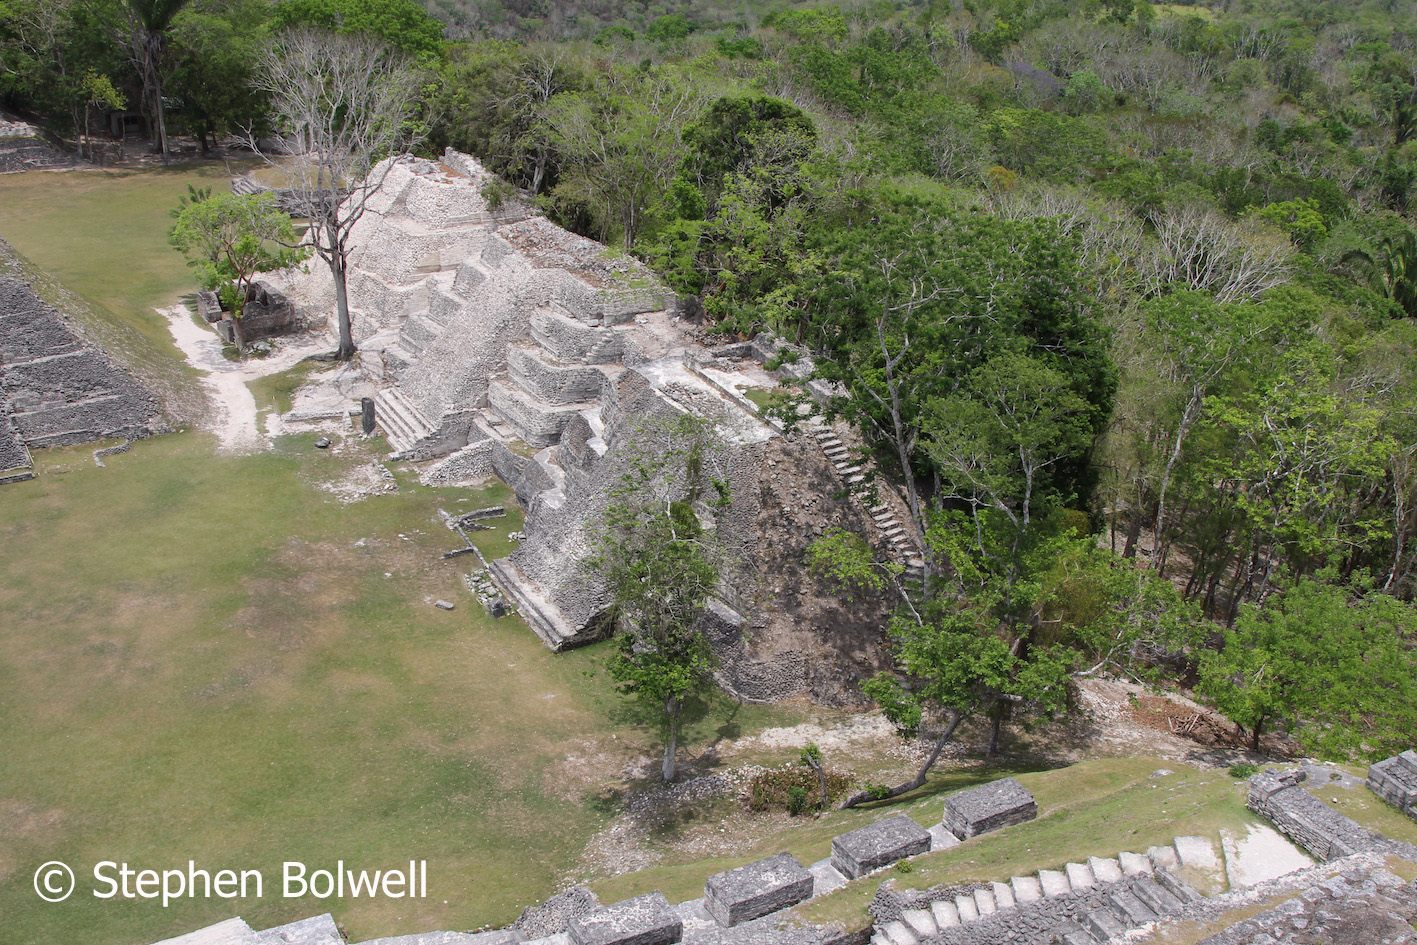 A view looking down from the top of El Castillo.